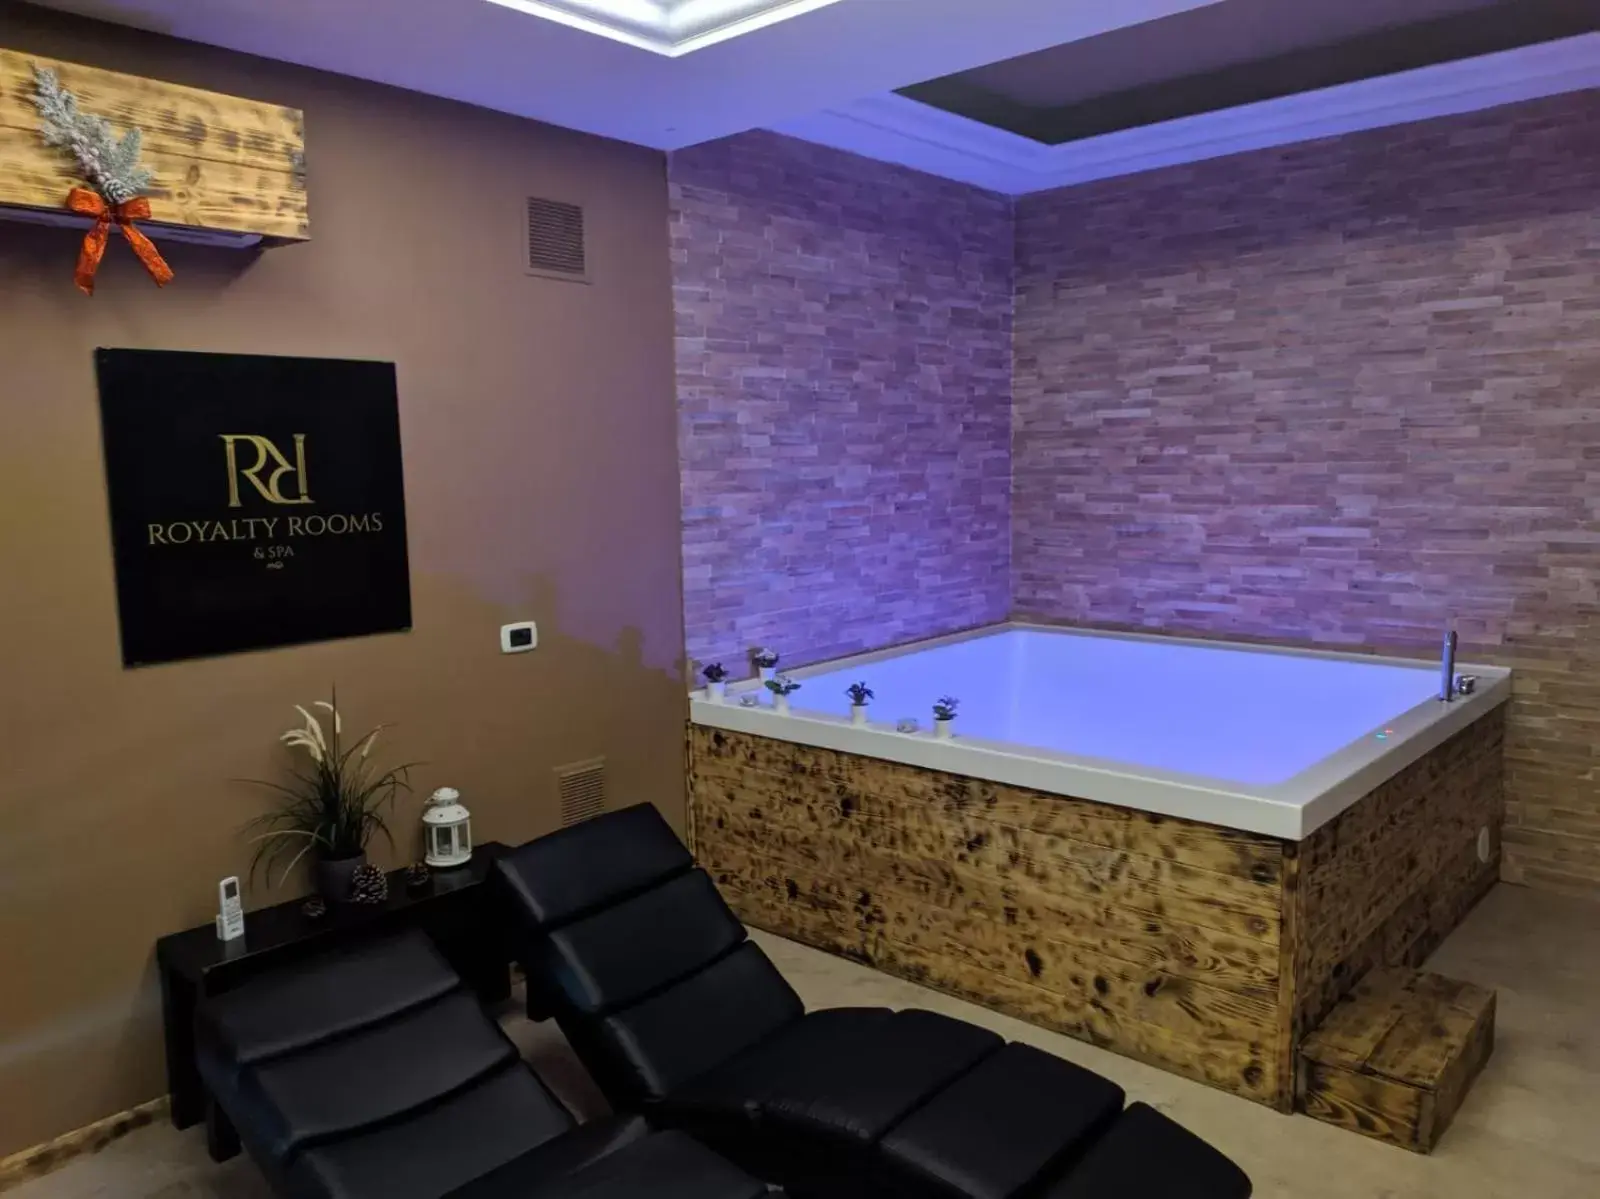 Hot Tub in Royalty Rooms & Spa